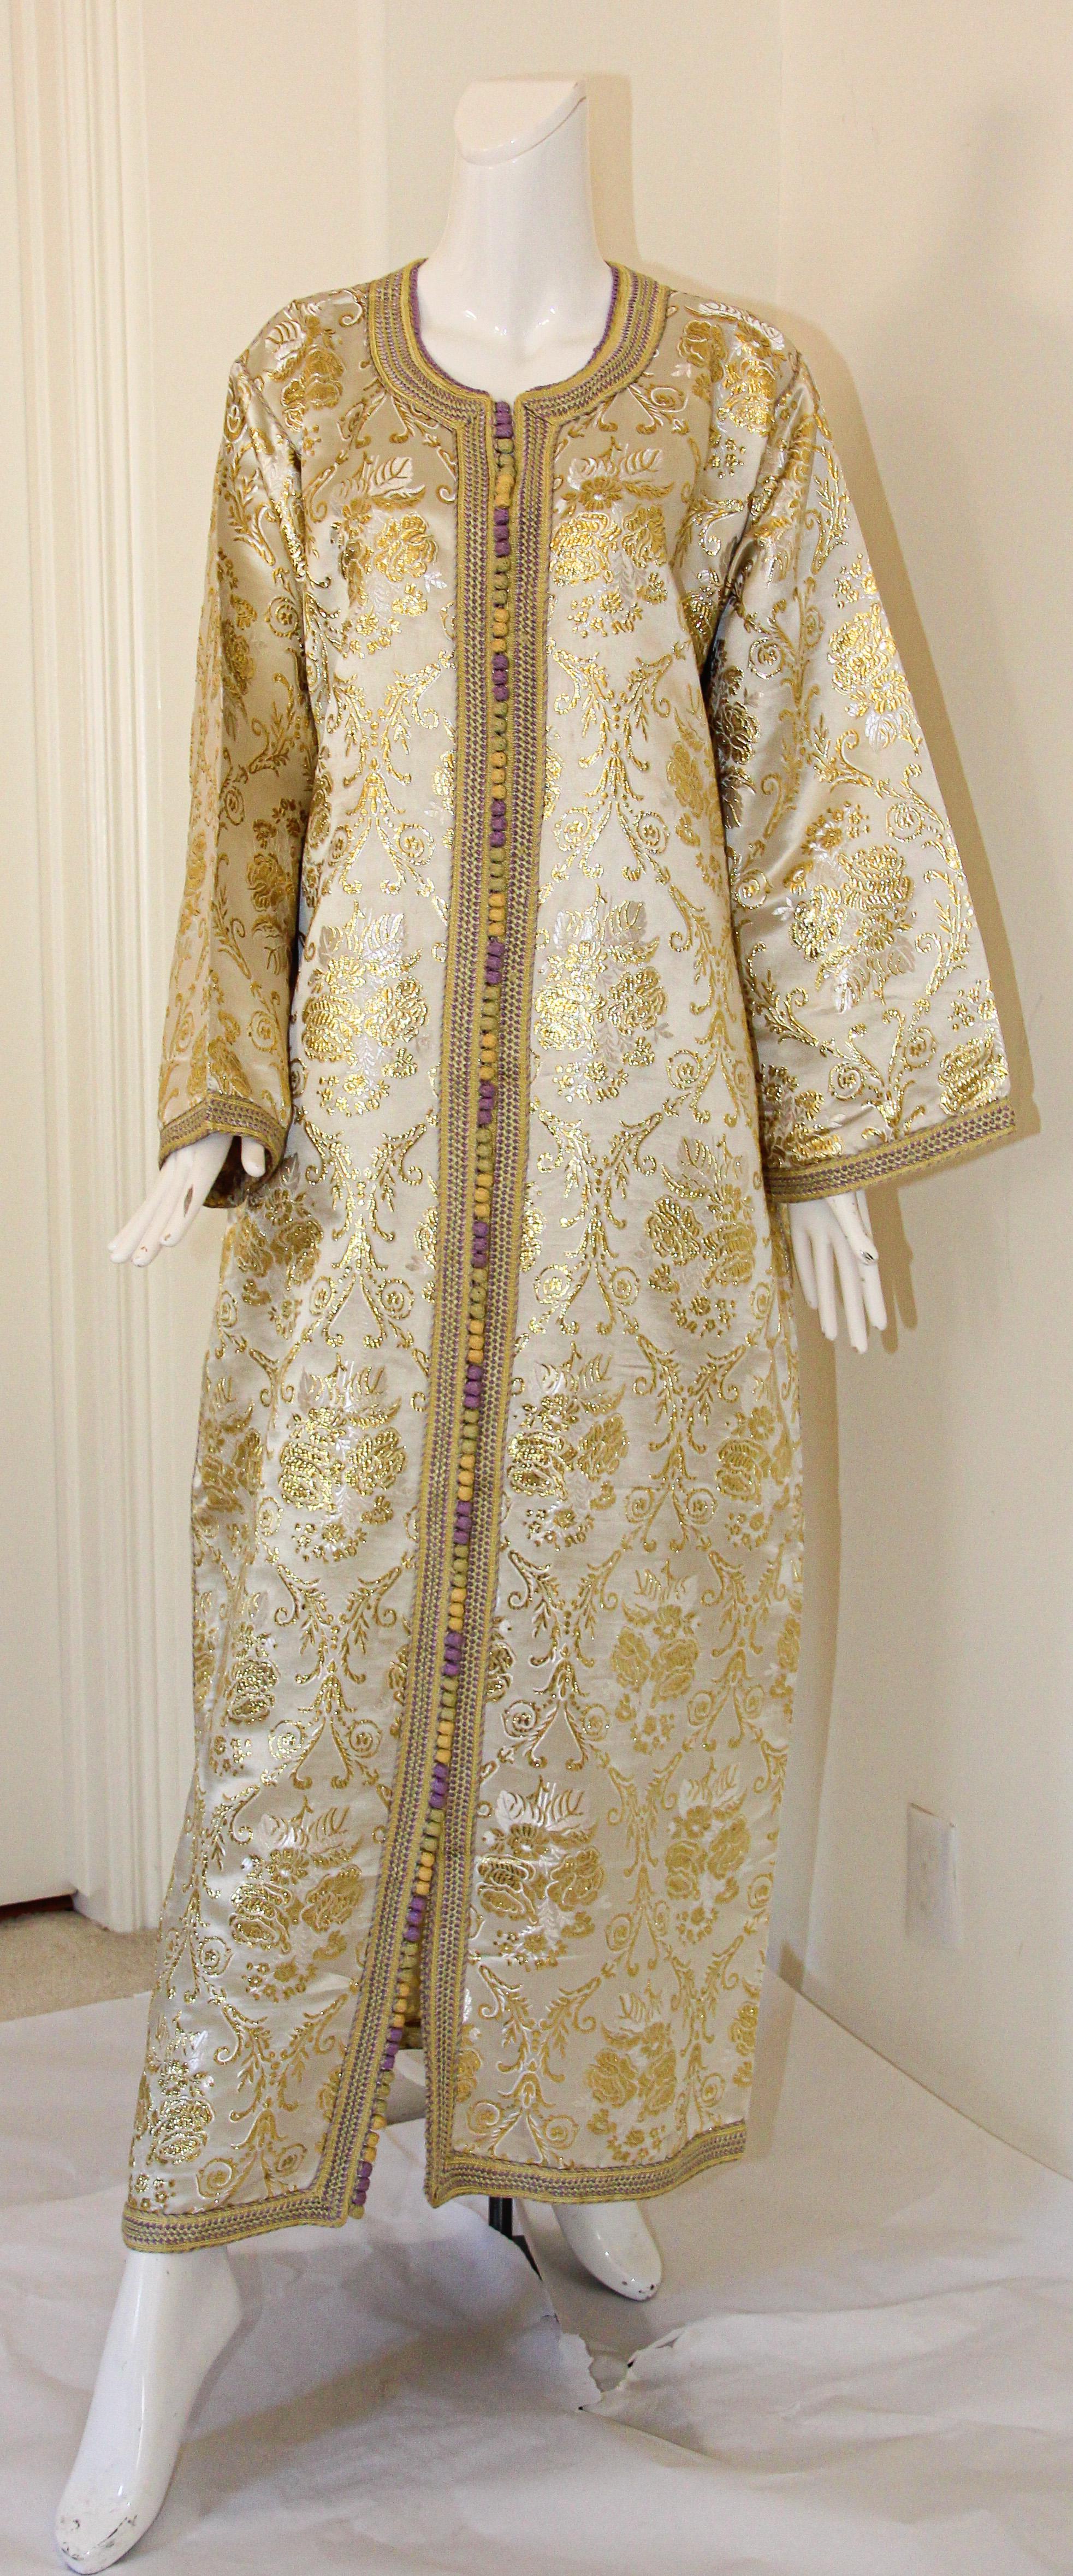 Moroccan vintage gold and silver metallic floral brocade dress kaftan with gold trim.
Handmade ceremonial caftan from North Africa, Morocco.
Vintage exotic 1970s metallic brocade caftan gown.
The luminous cream and gold metallic caftan maxi dress